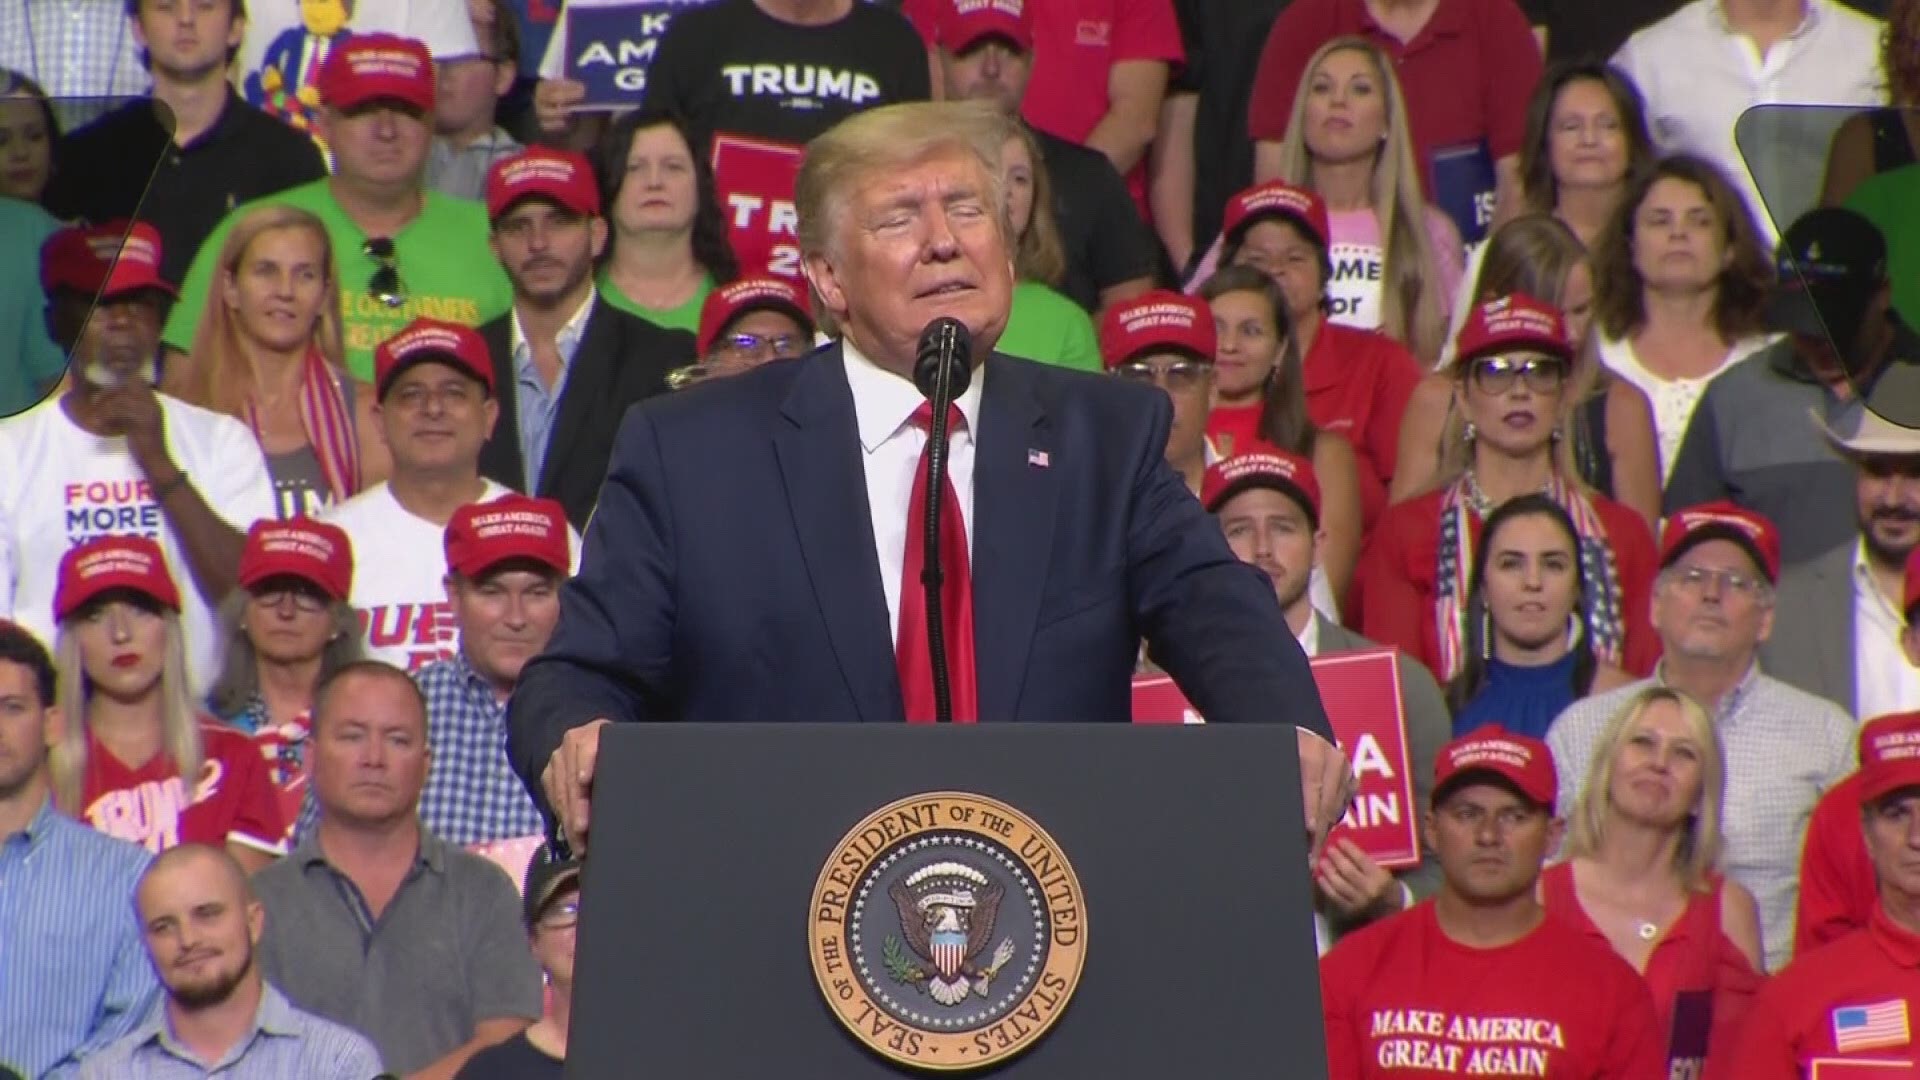 President Donald Trump is officially kicking off his 2020 reelection campaign with a rally at the Amway Center in Orlando today.

Refresh this page for the latest updates from the rally.